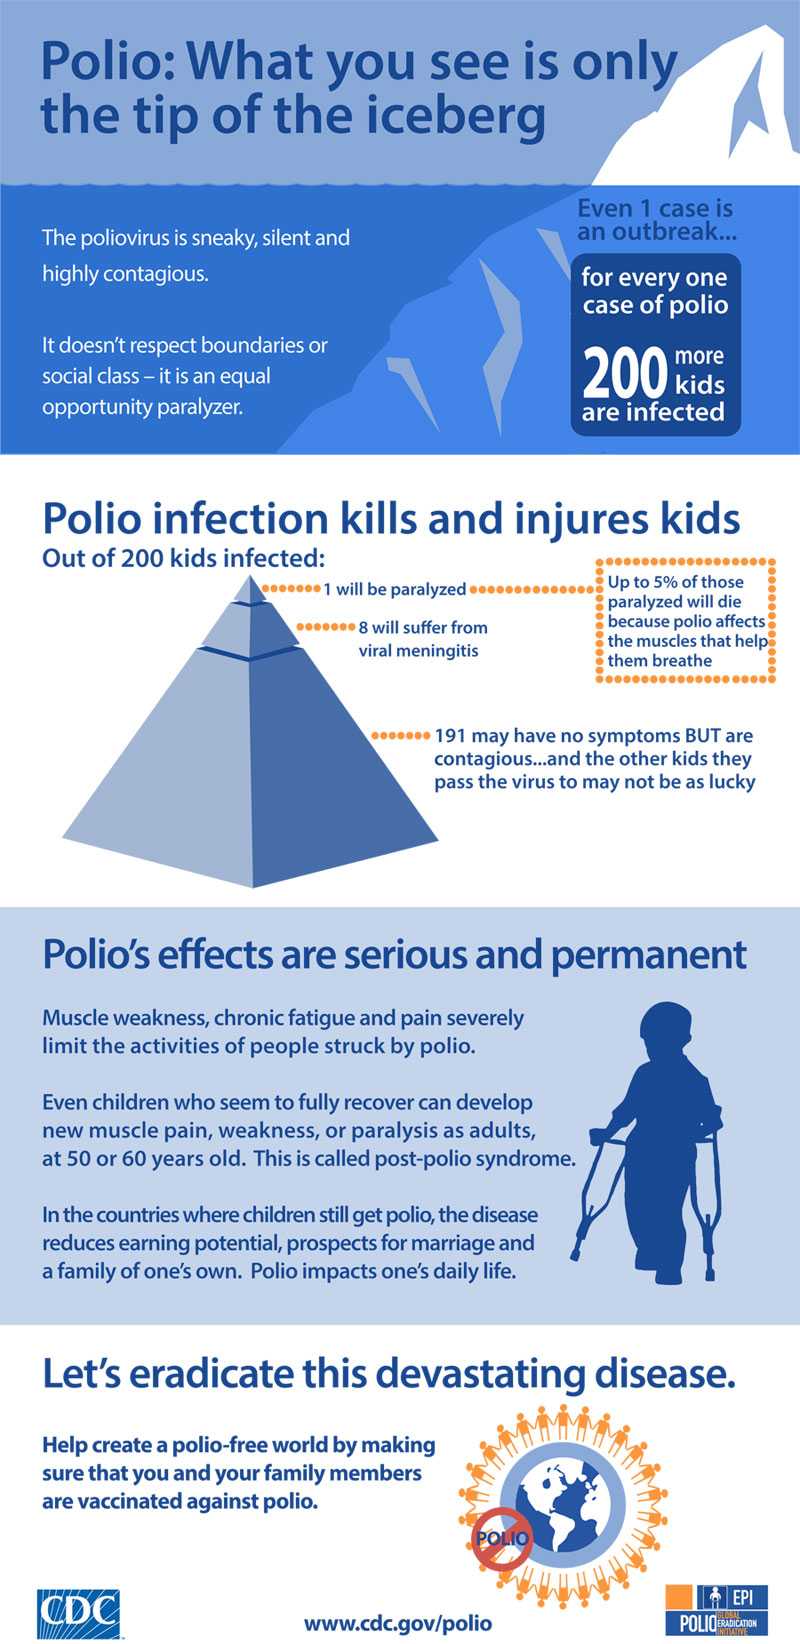 Polio: What you see is only the tip of the iceberg.